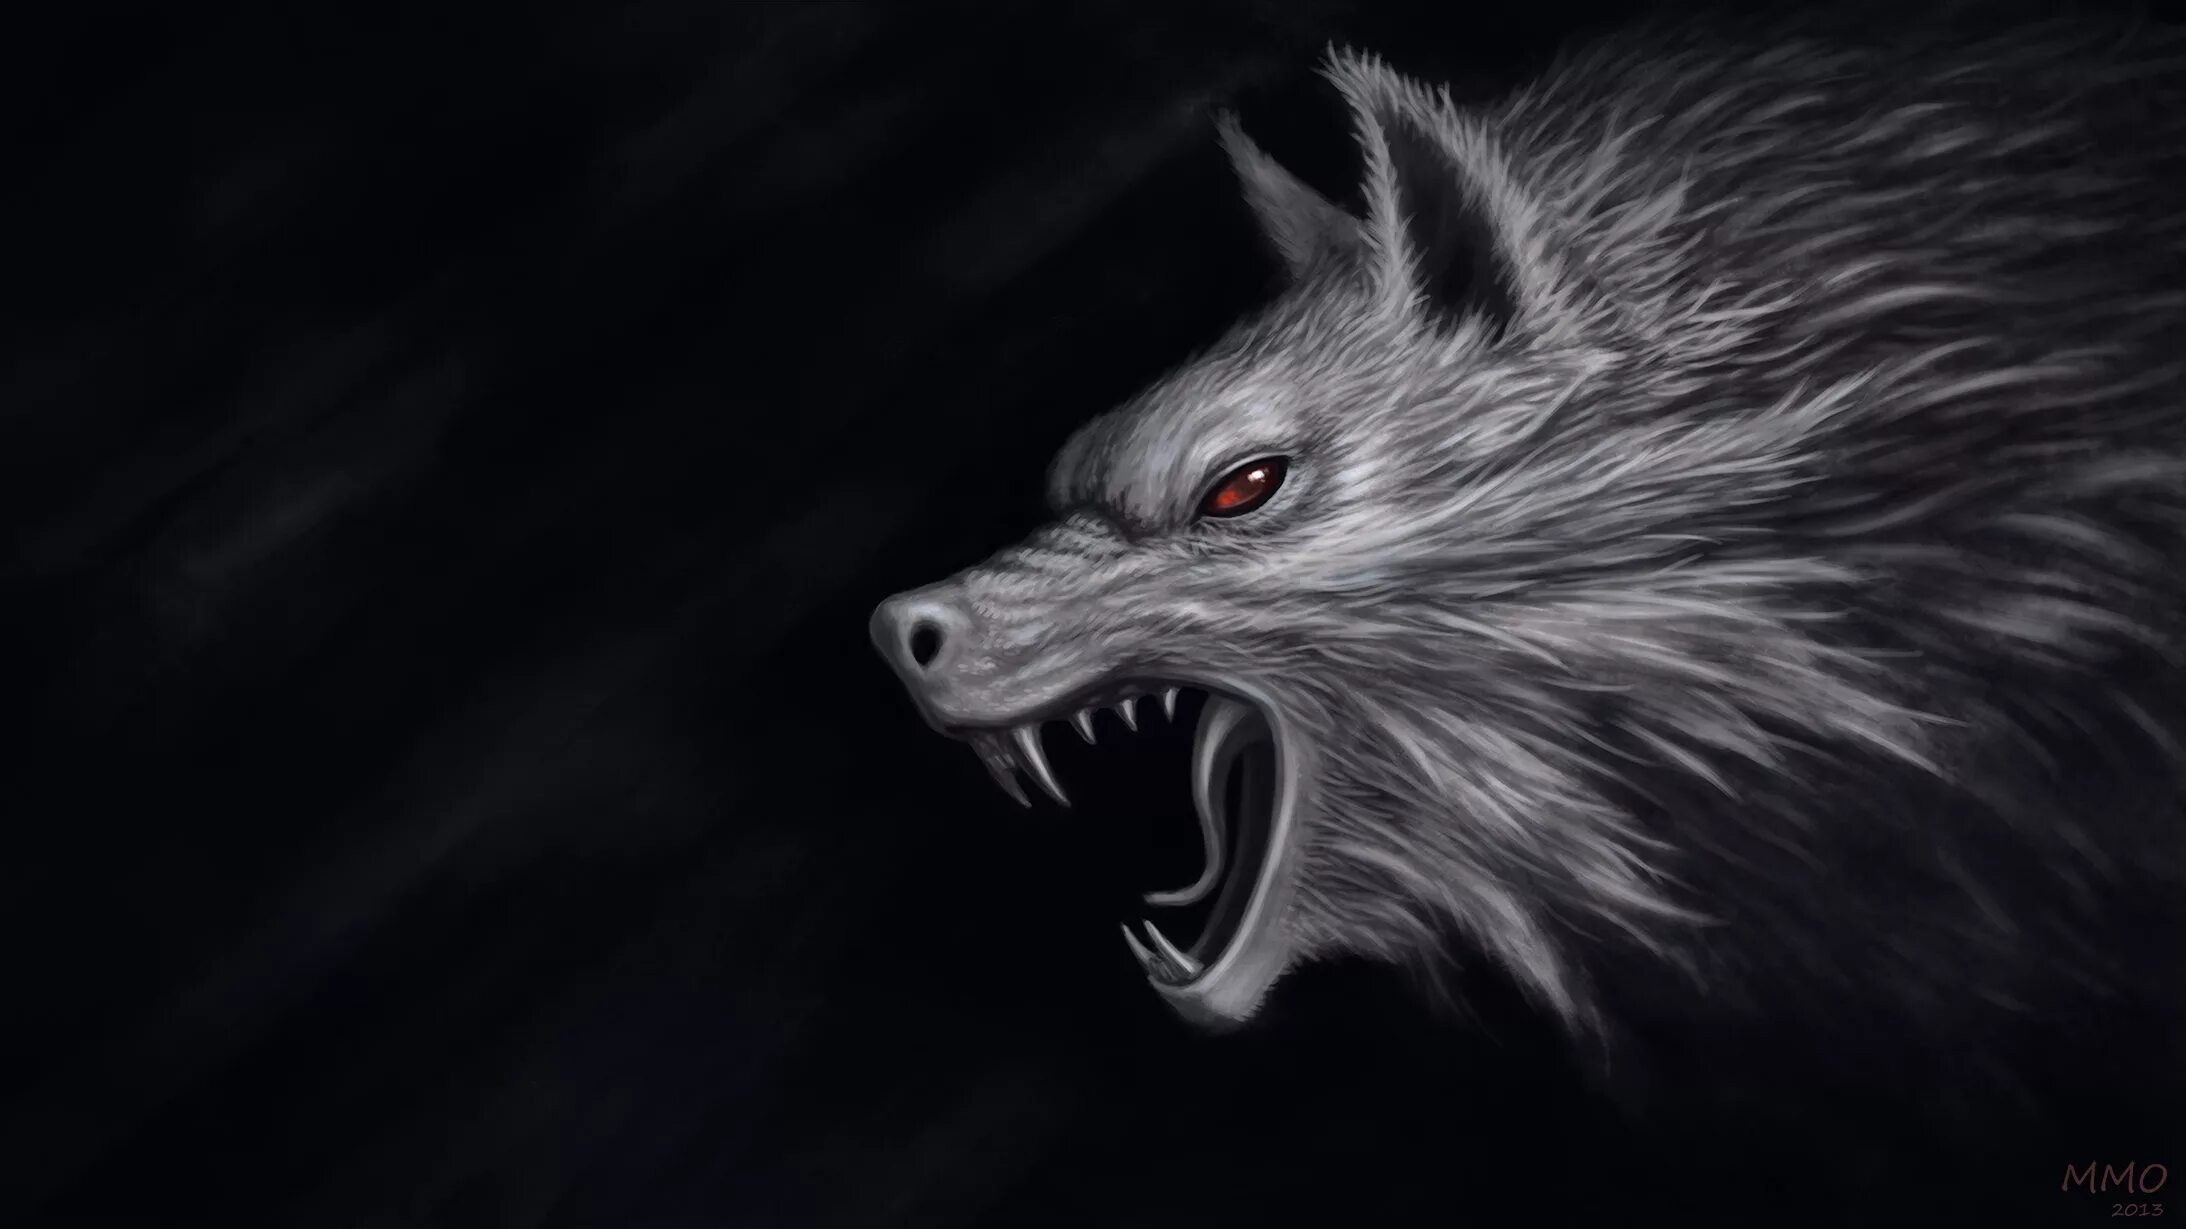 Wolf gaming wallpapers. Wallpapers.